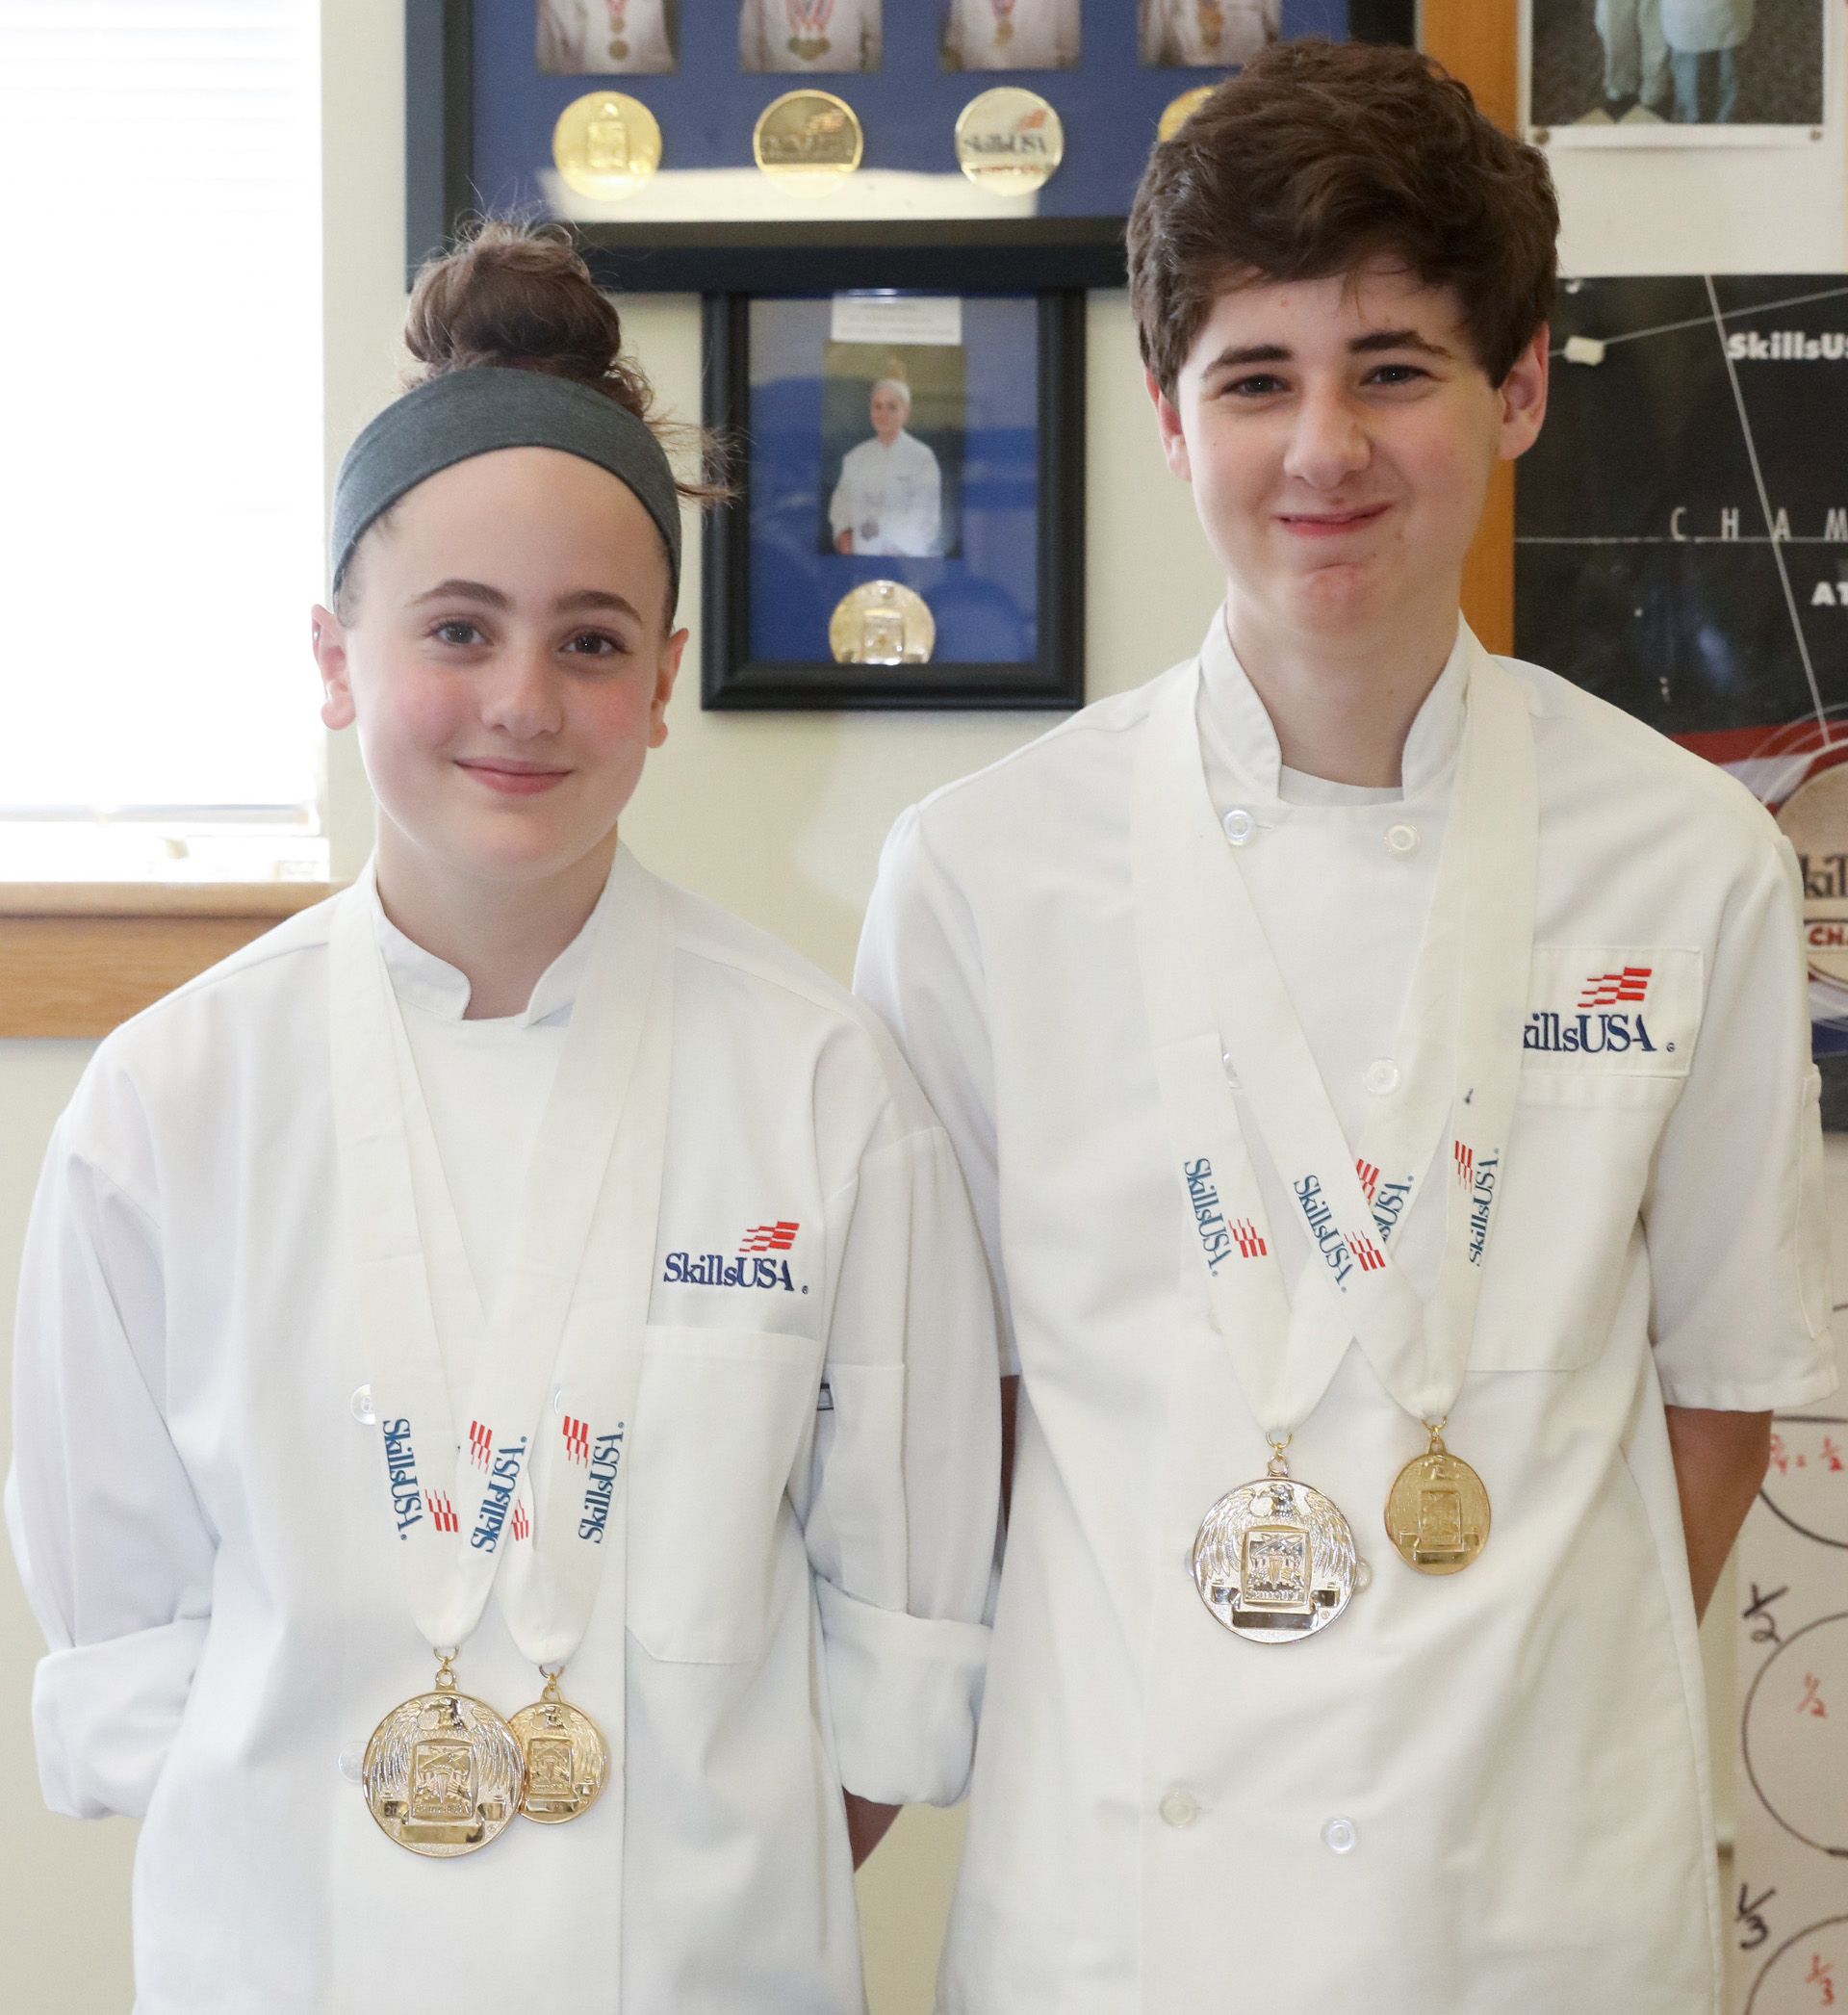 Gwen and Max Frechette with SkillsUSA medals